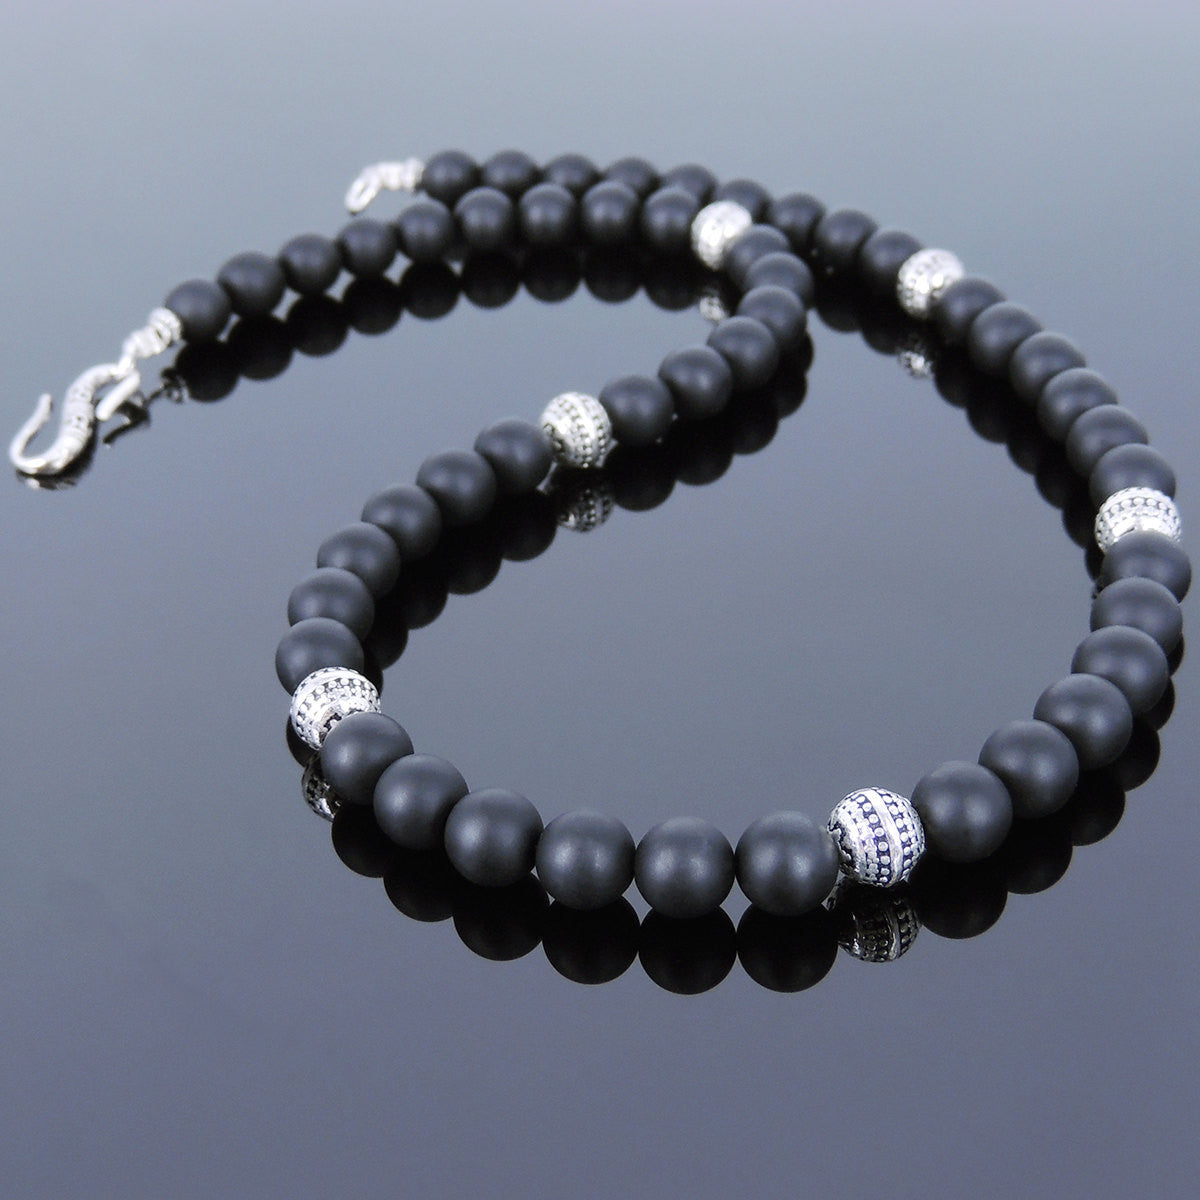 8mm Matte Black Onyx Healing Gemstone Necklace with S925 Sterling Silver Artisan Beads & S- Hook Clasp - Handmade by Gem & Silver NK115